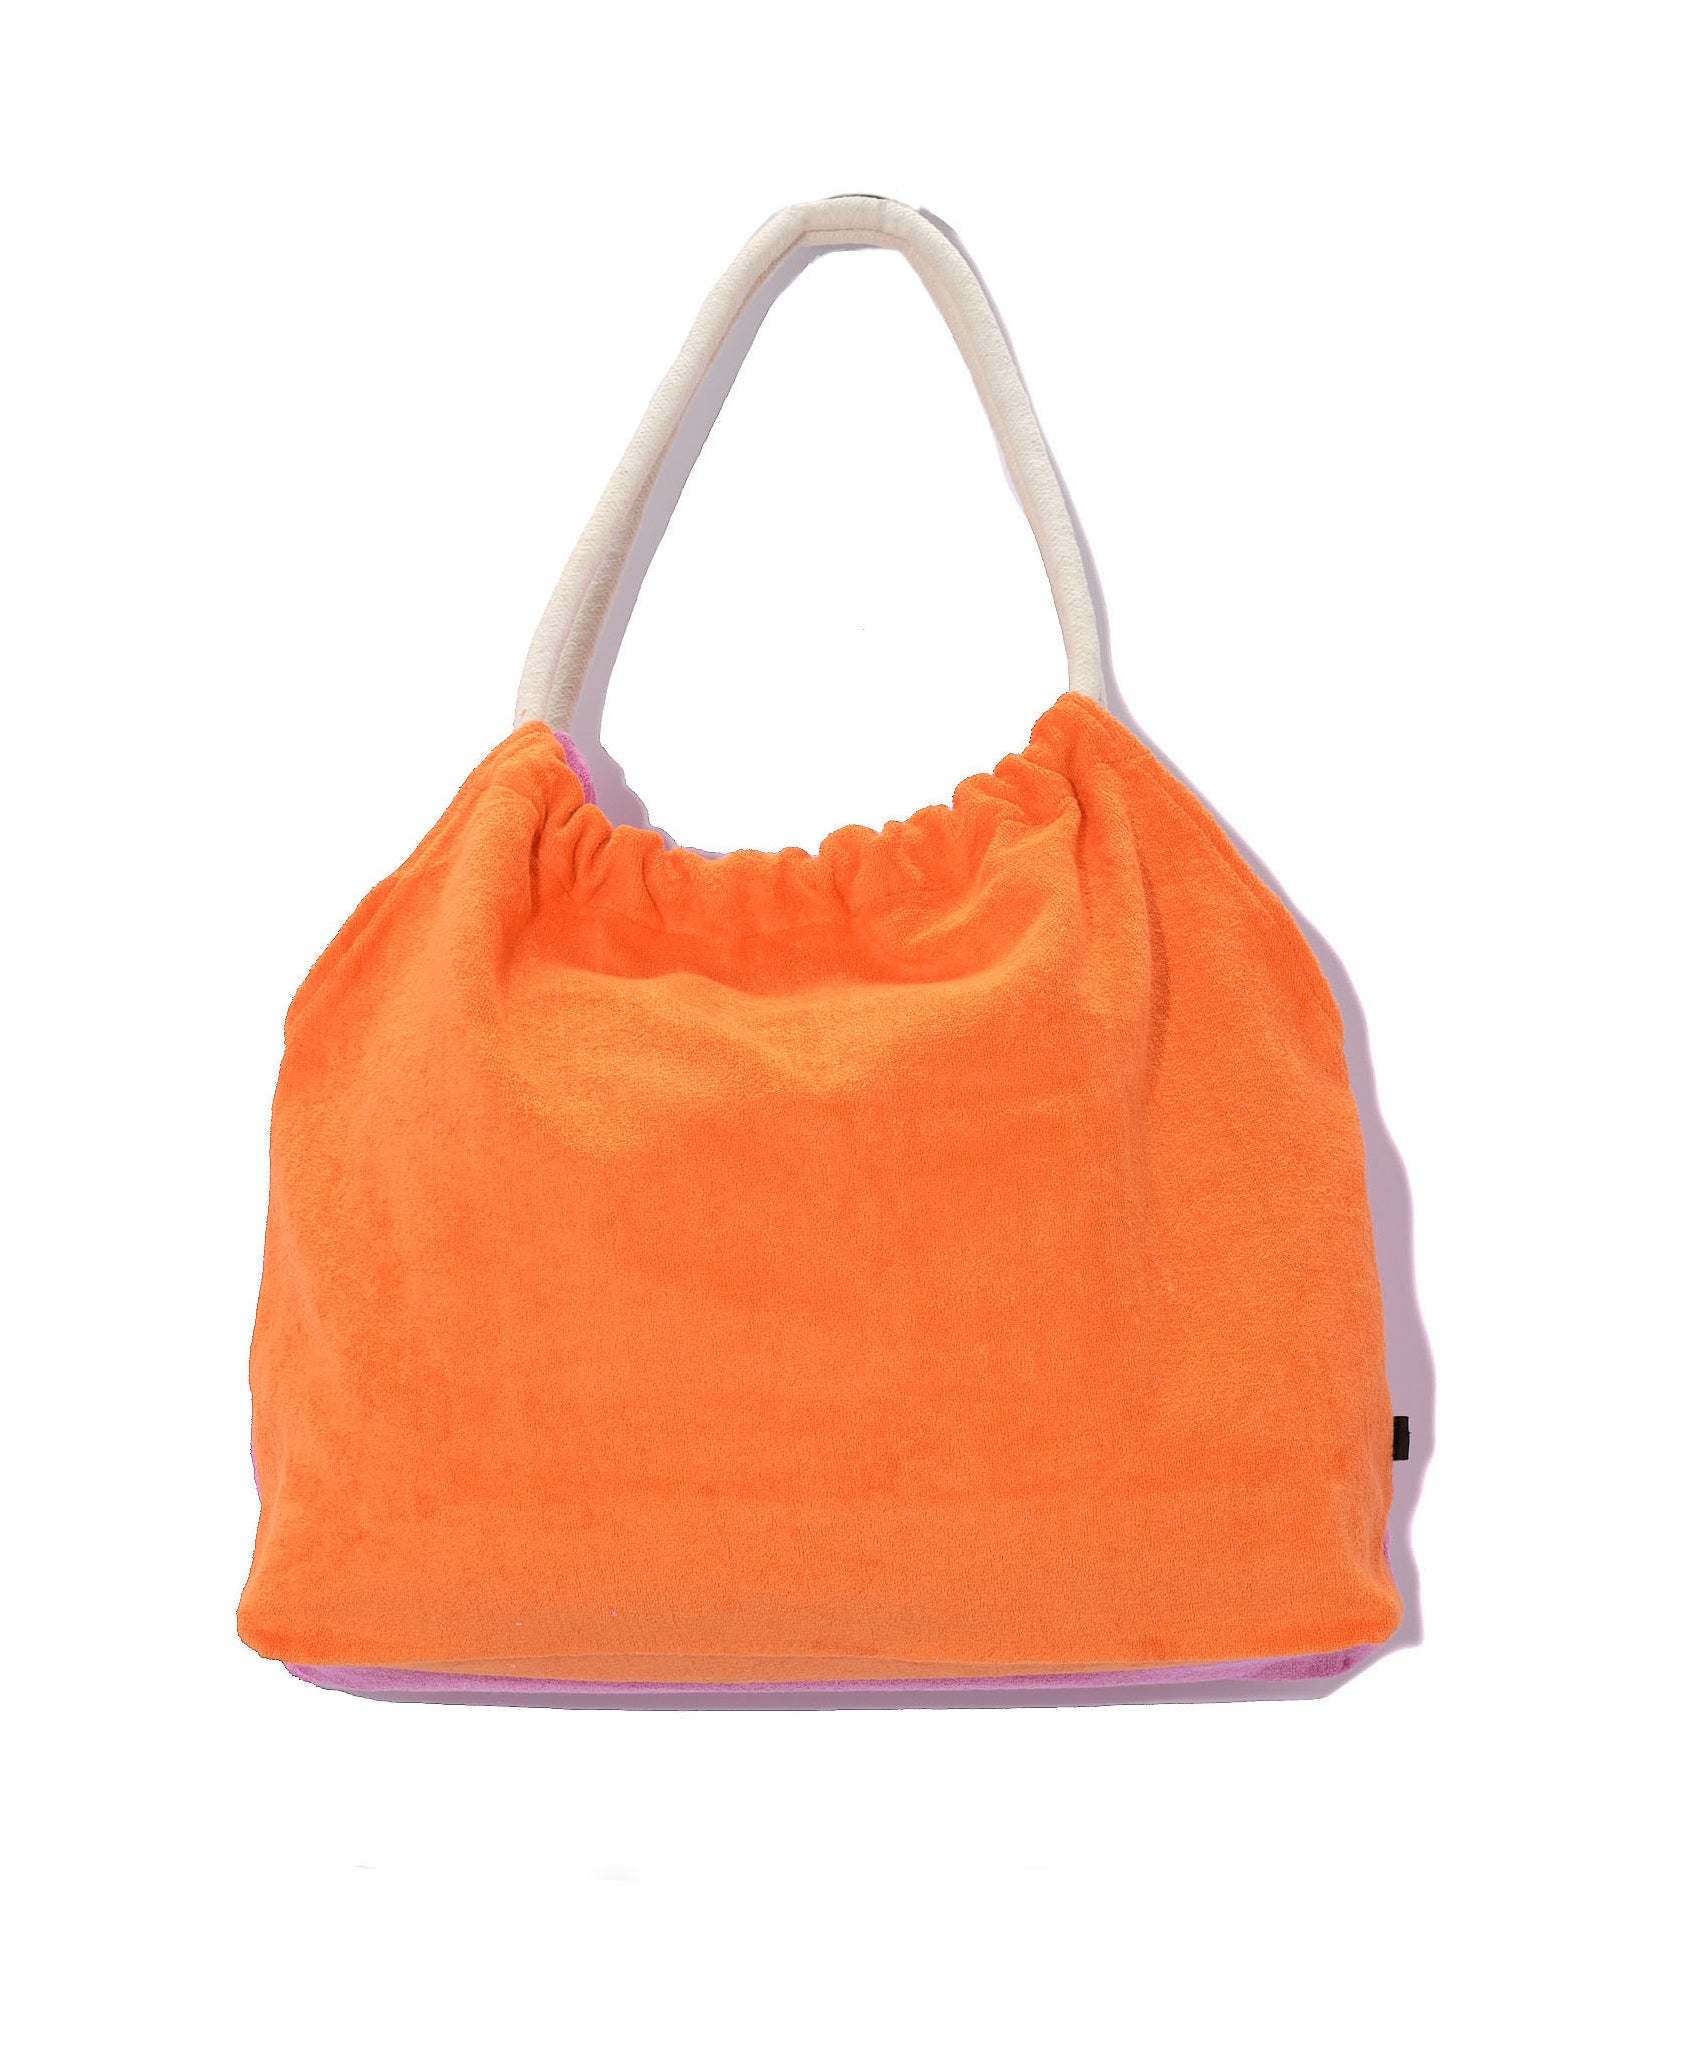 Cotton Terry Tote Bag